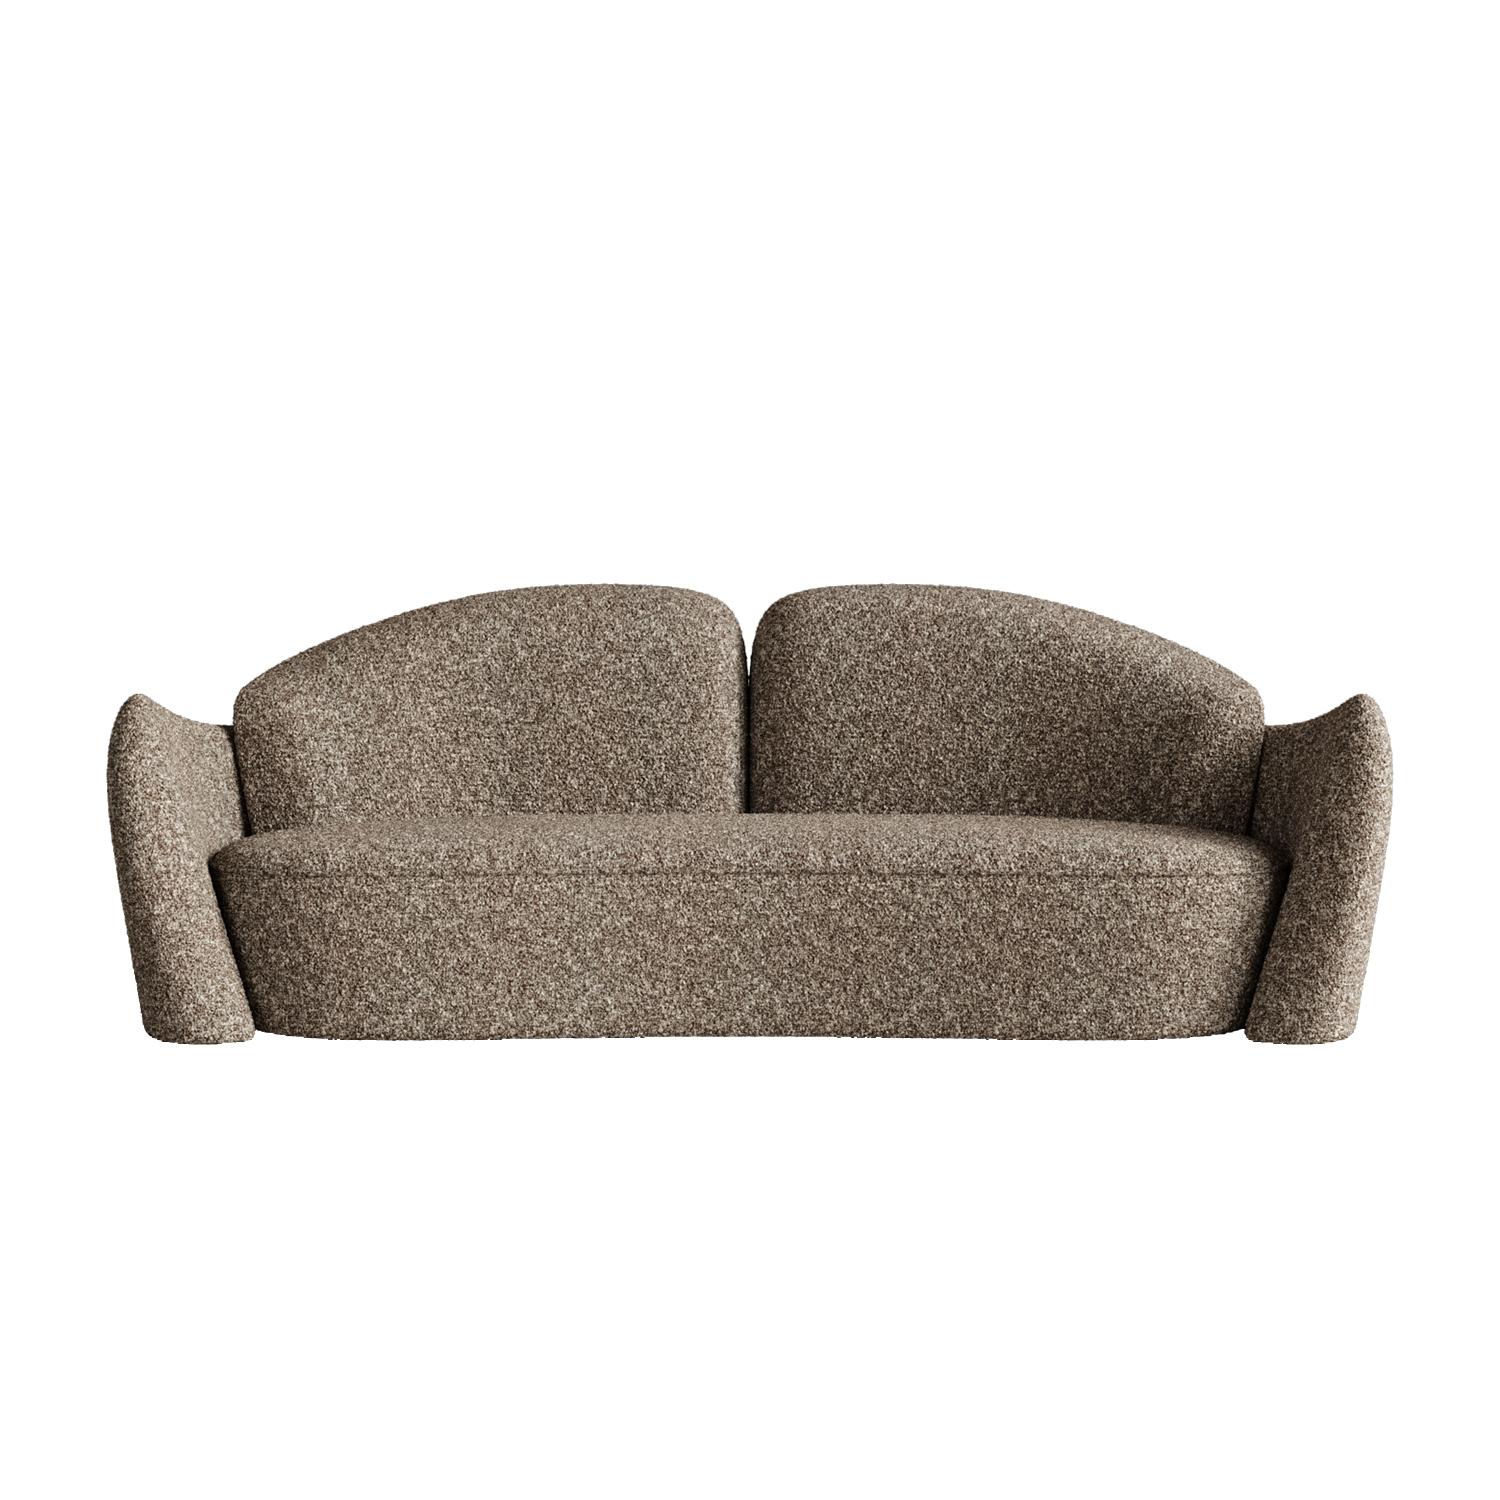 Beige Memory Sofa by Plyus Design
Dimensions: D 90 x W 240 x H 85 cm
Materials:  Wood, HR foam, polyester wadding, fabric upholstery

“Memory” sofa.
Collection 